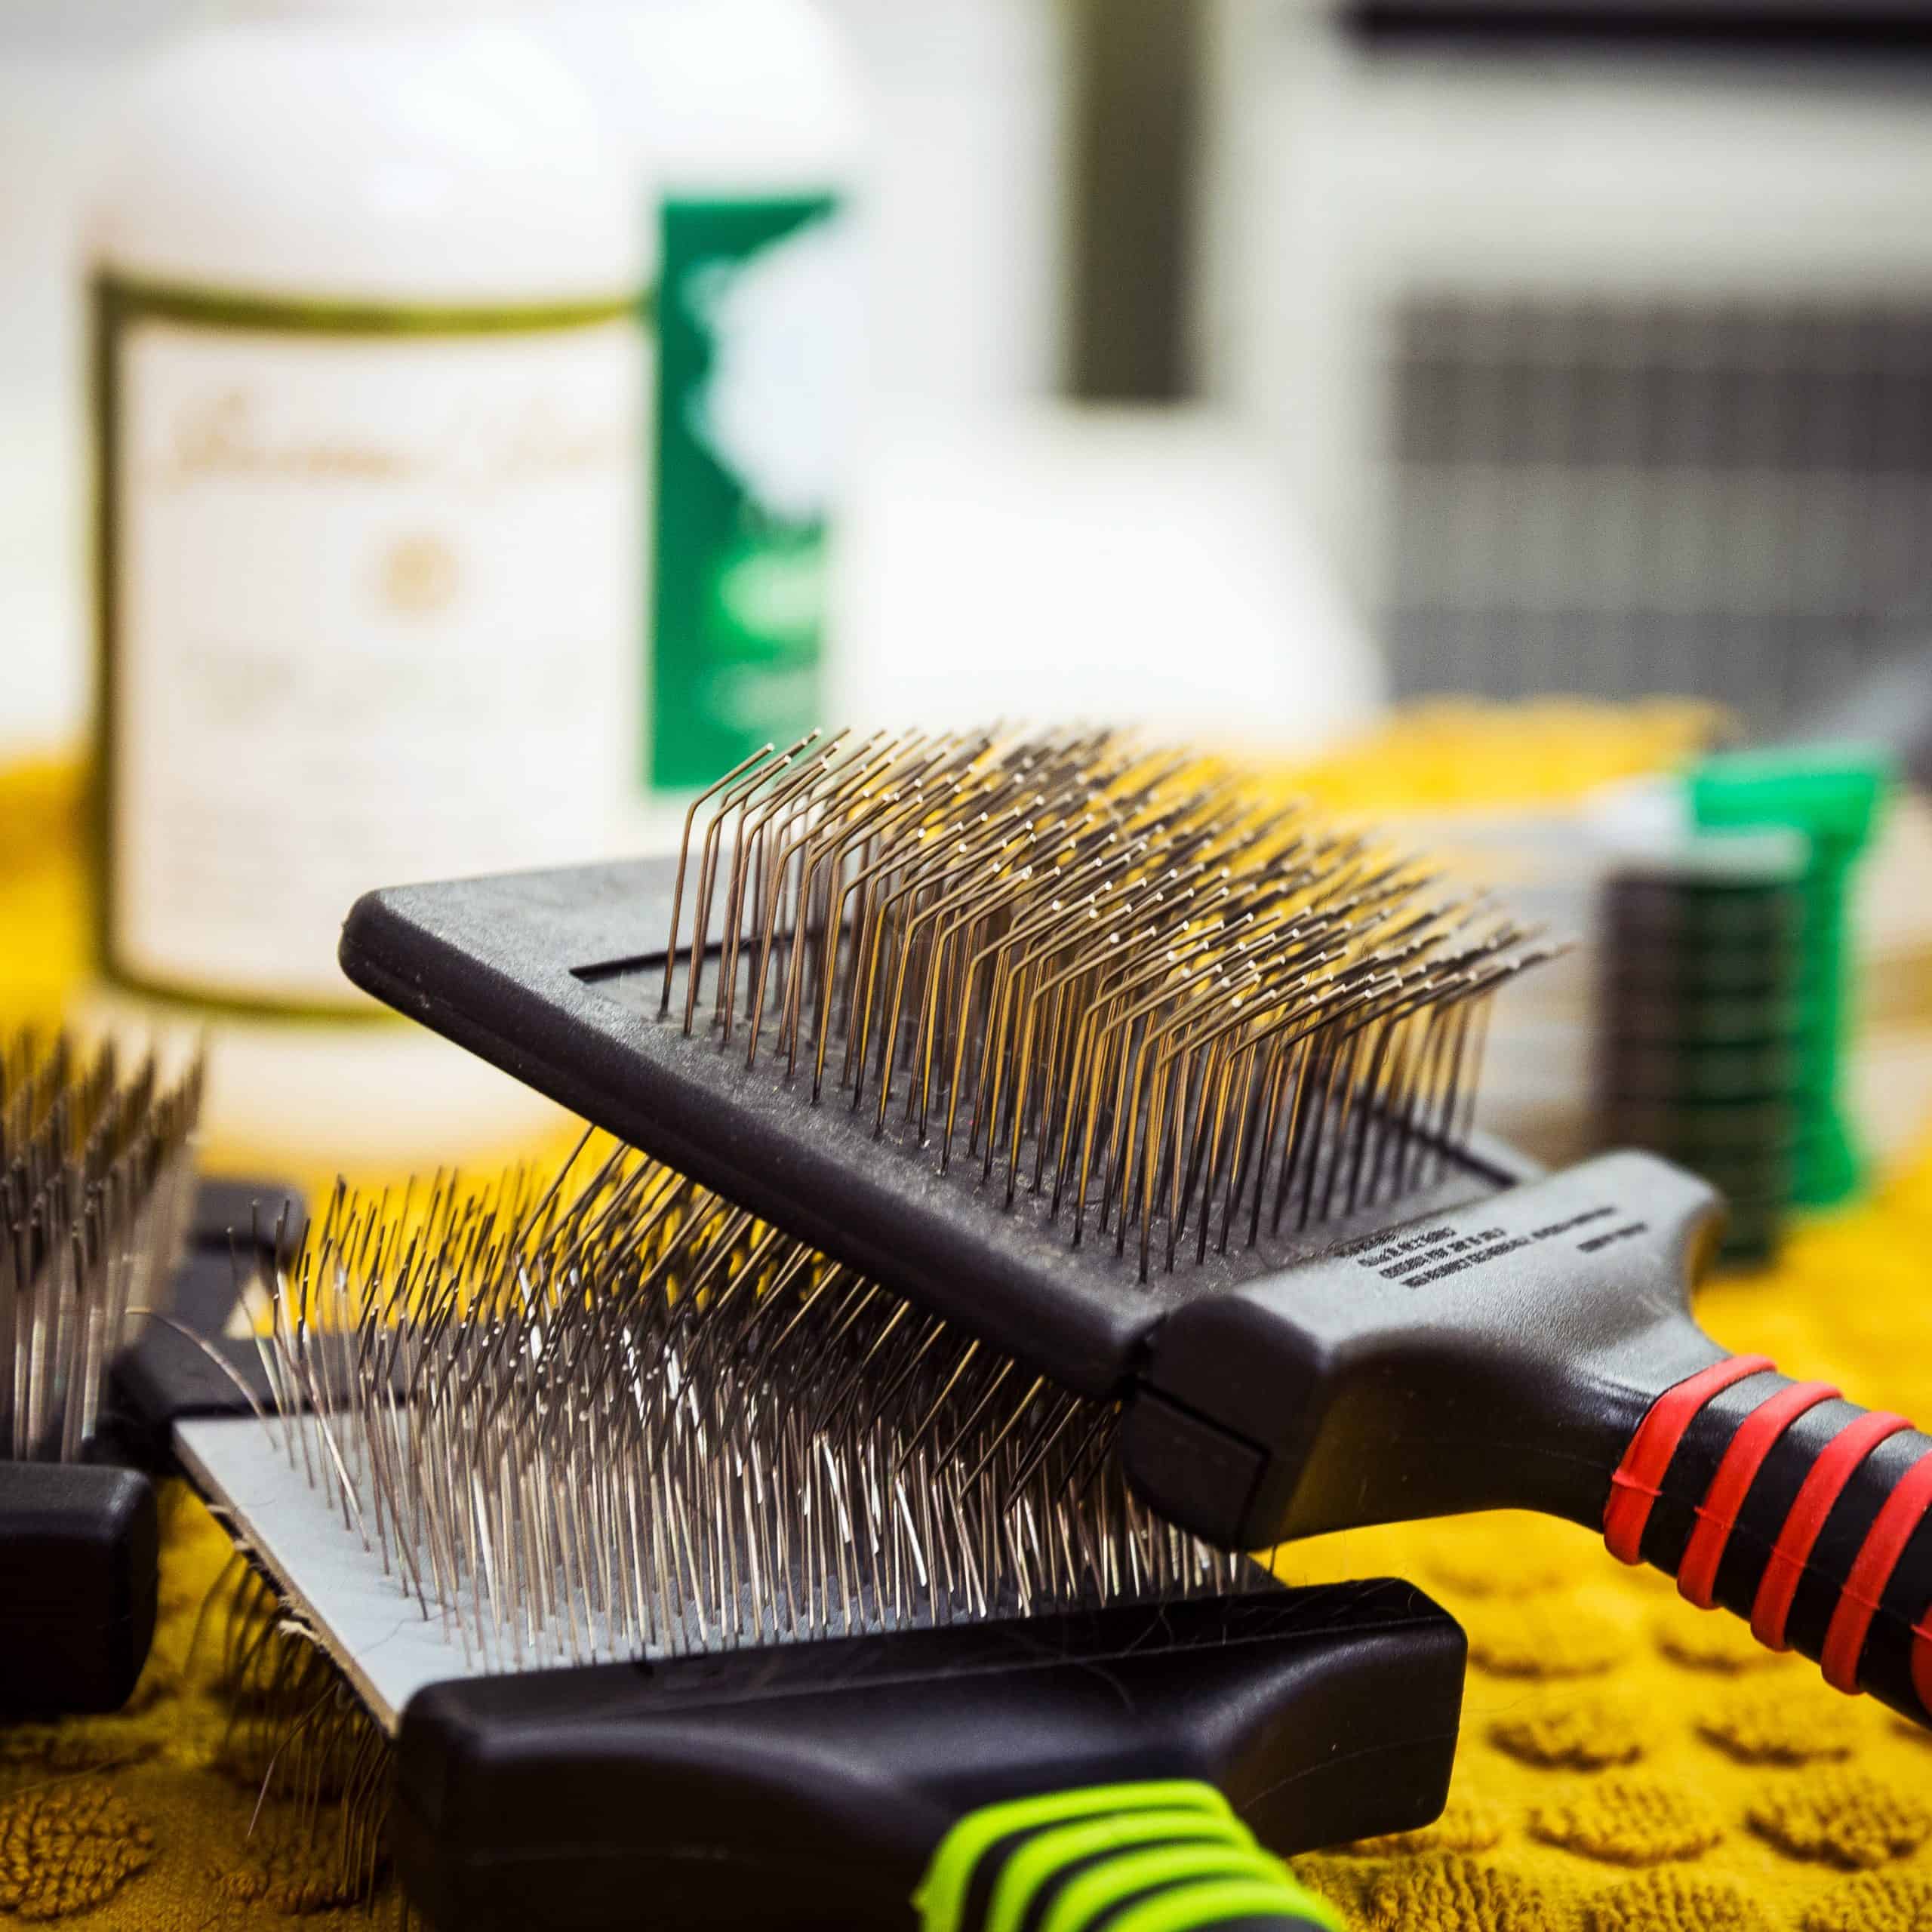 Tools for brushing your dog at home